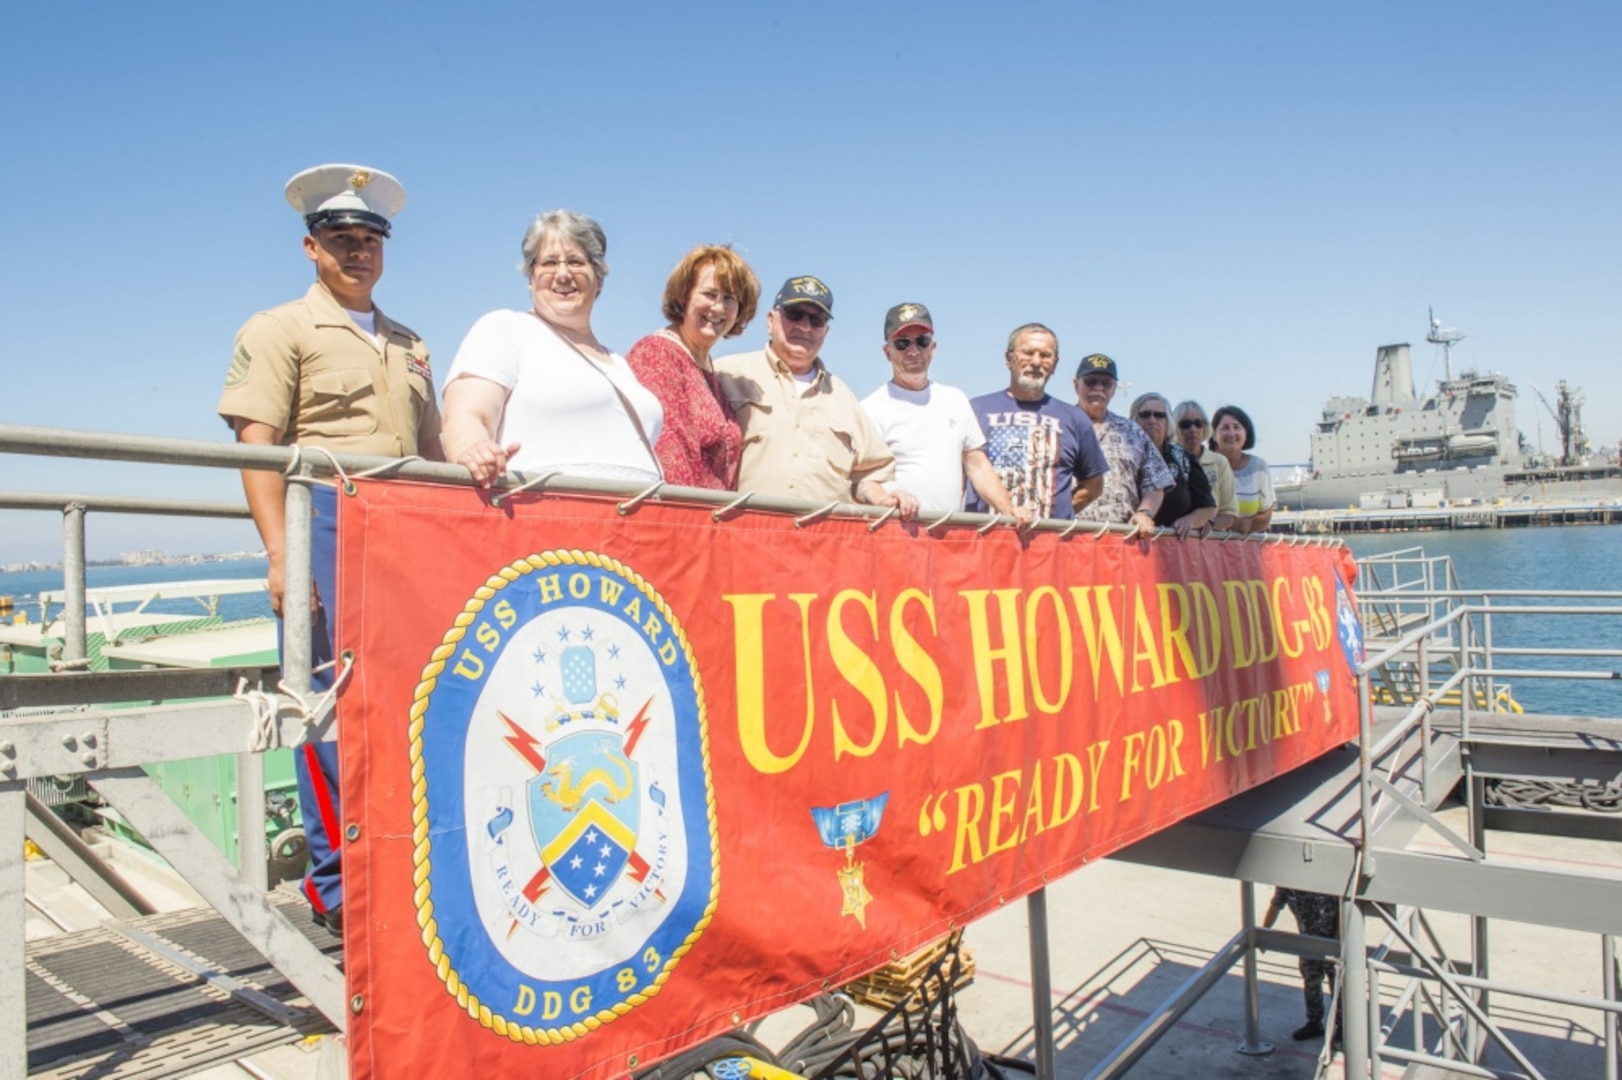 160617-N-IK388-074 (June 17, 2016) "Marine Corps veterans and Battle of Hill 488 Vietnam War survivors pose with the five daughters of 1st Sgt. Jimmie E. Howard, a Medal of Honor recipient of the Vietnam War and namesake of the guided-missile destroyer USS Howard (DDG 83), after a tour of the ship. Howard hosted the tour to recognize the 50th anniversary of the June 15, 1966 battle. (U.S. Navy photo by Mass Communication Specialist 2nd Class Stacy M. Atkins Ricks/Released)